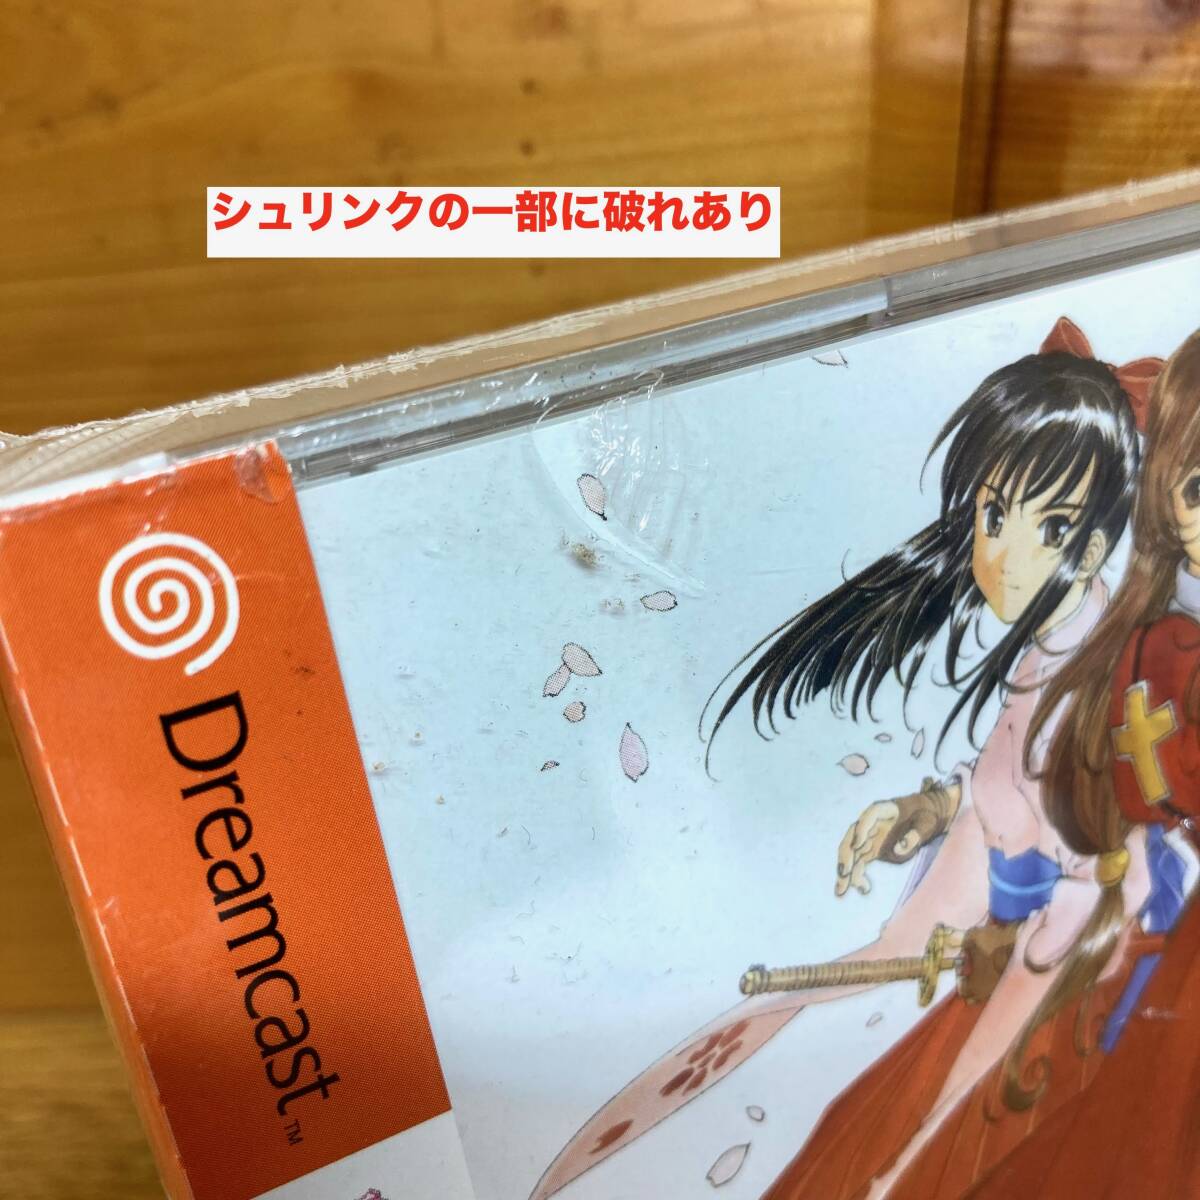 * prompt decision free shipping [ new goods unopened ] Dreamcast soft Sakura Taisen 4 ~.... woman ~ collection retro game that time thing ultra rare obi 